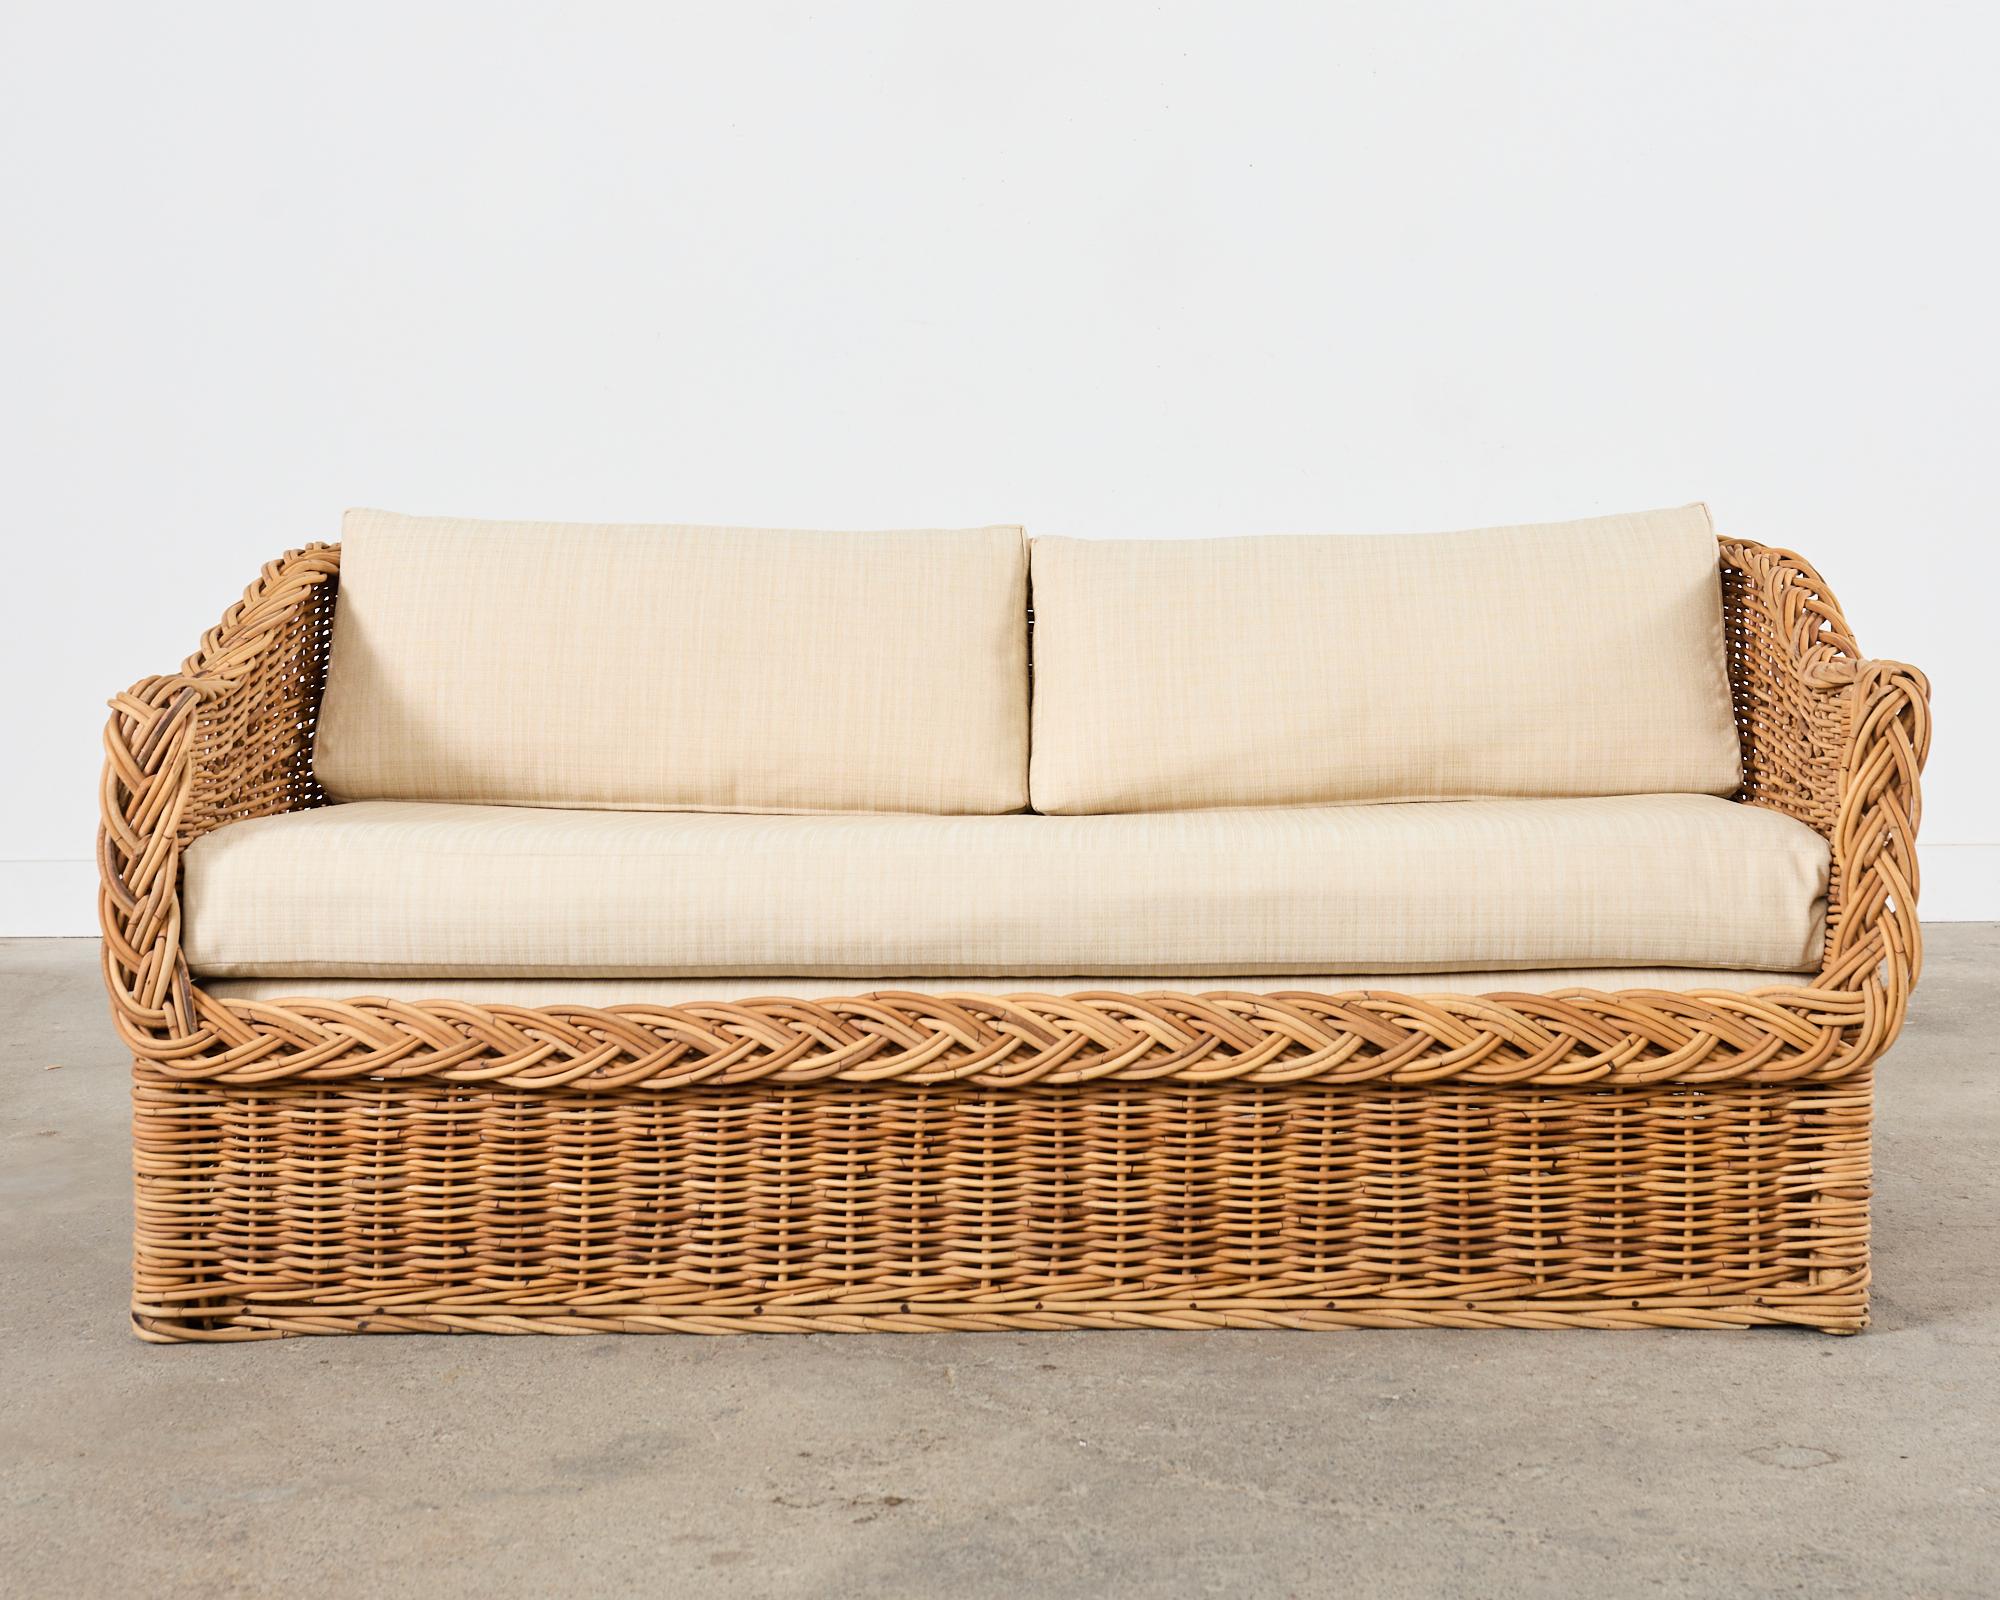 20th Century Michael Taylor Style Wicker Rattan Sofa and Settee by Wicker Works For Sale